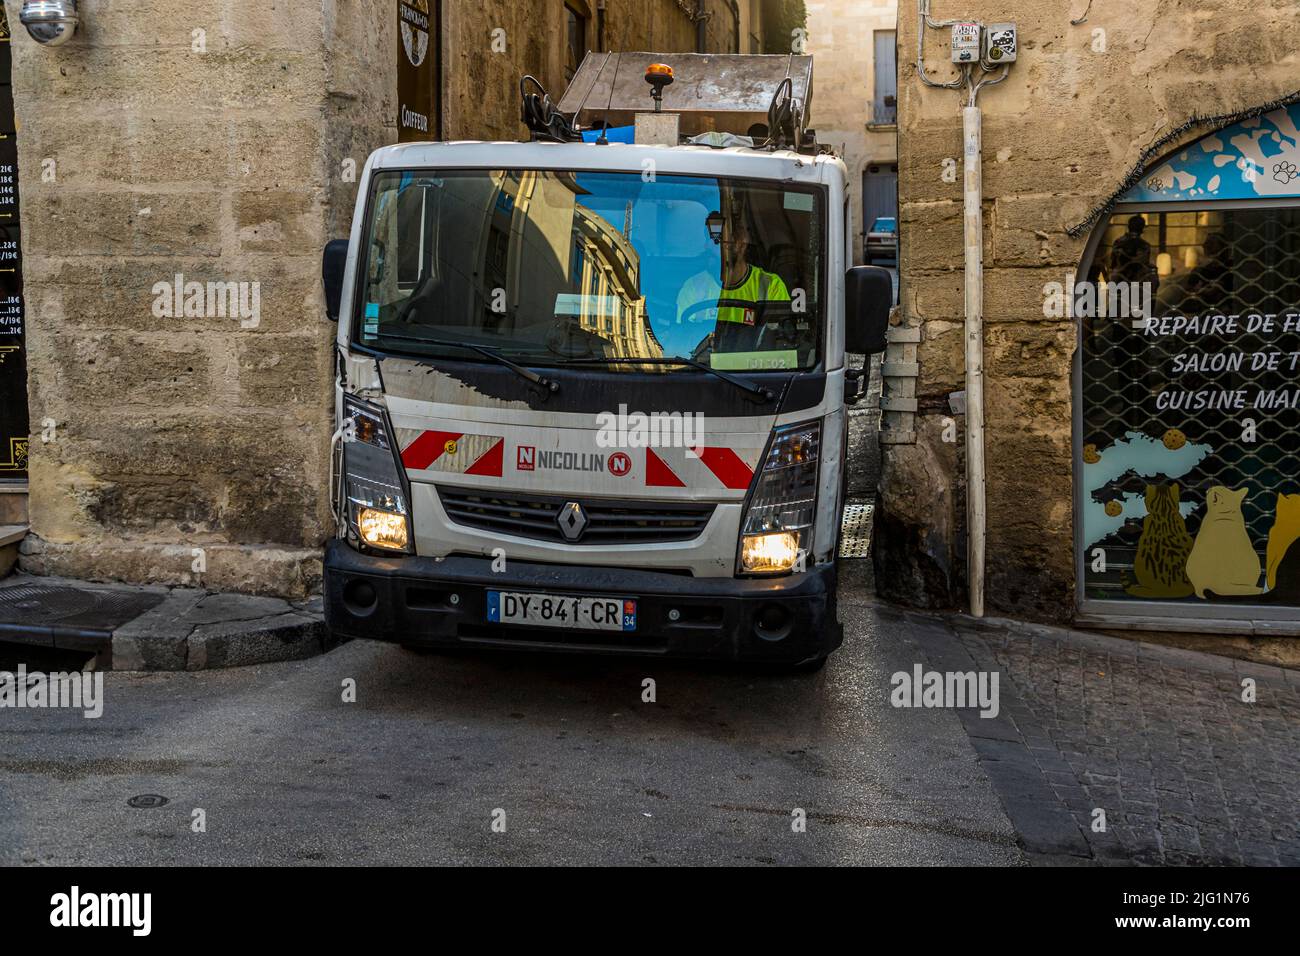 Daily garbage collection and street cleaning in Montpellier, France Stock Photo